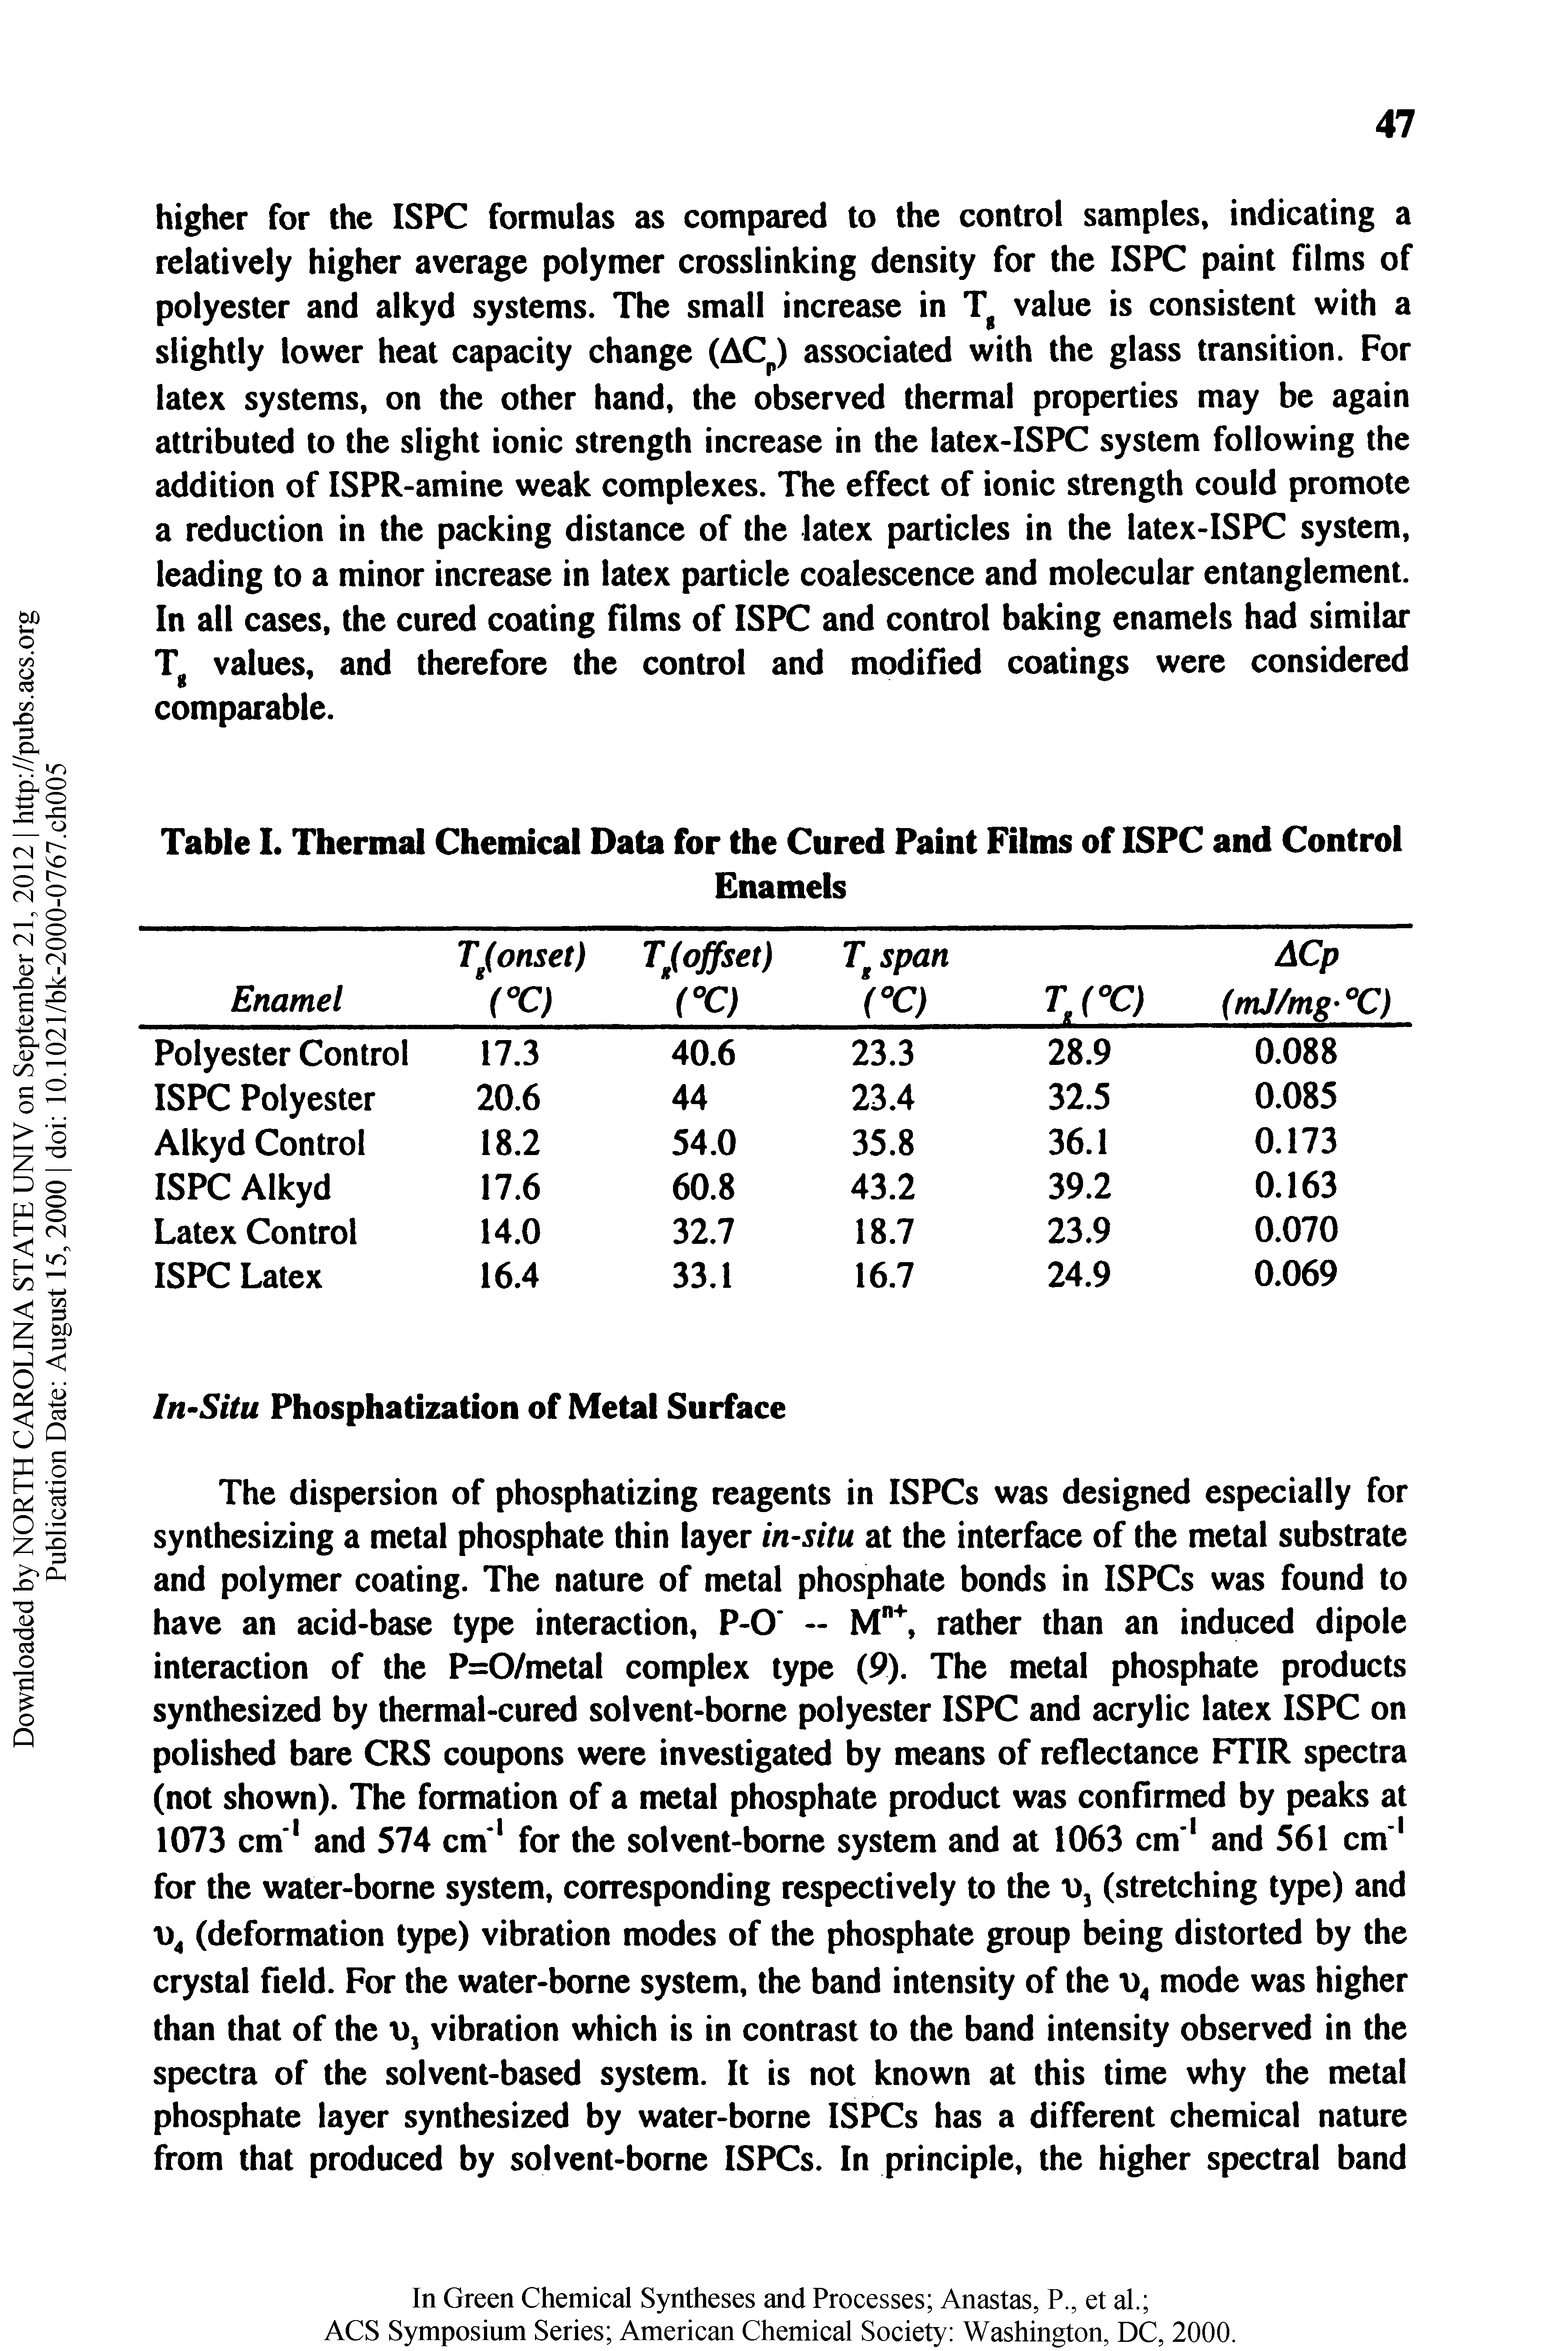 Table I. Thermal Chemical Data for the Cured Paint Films of ISPC and Control...